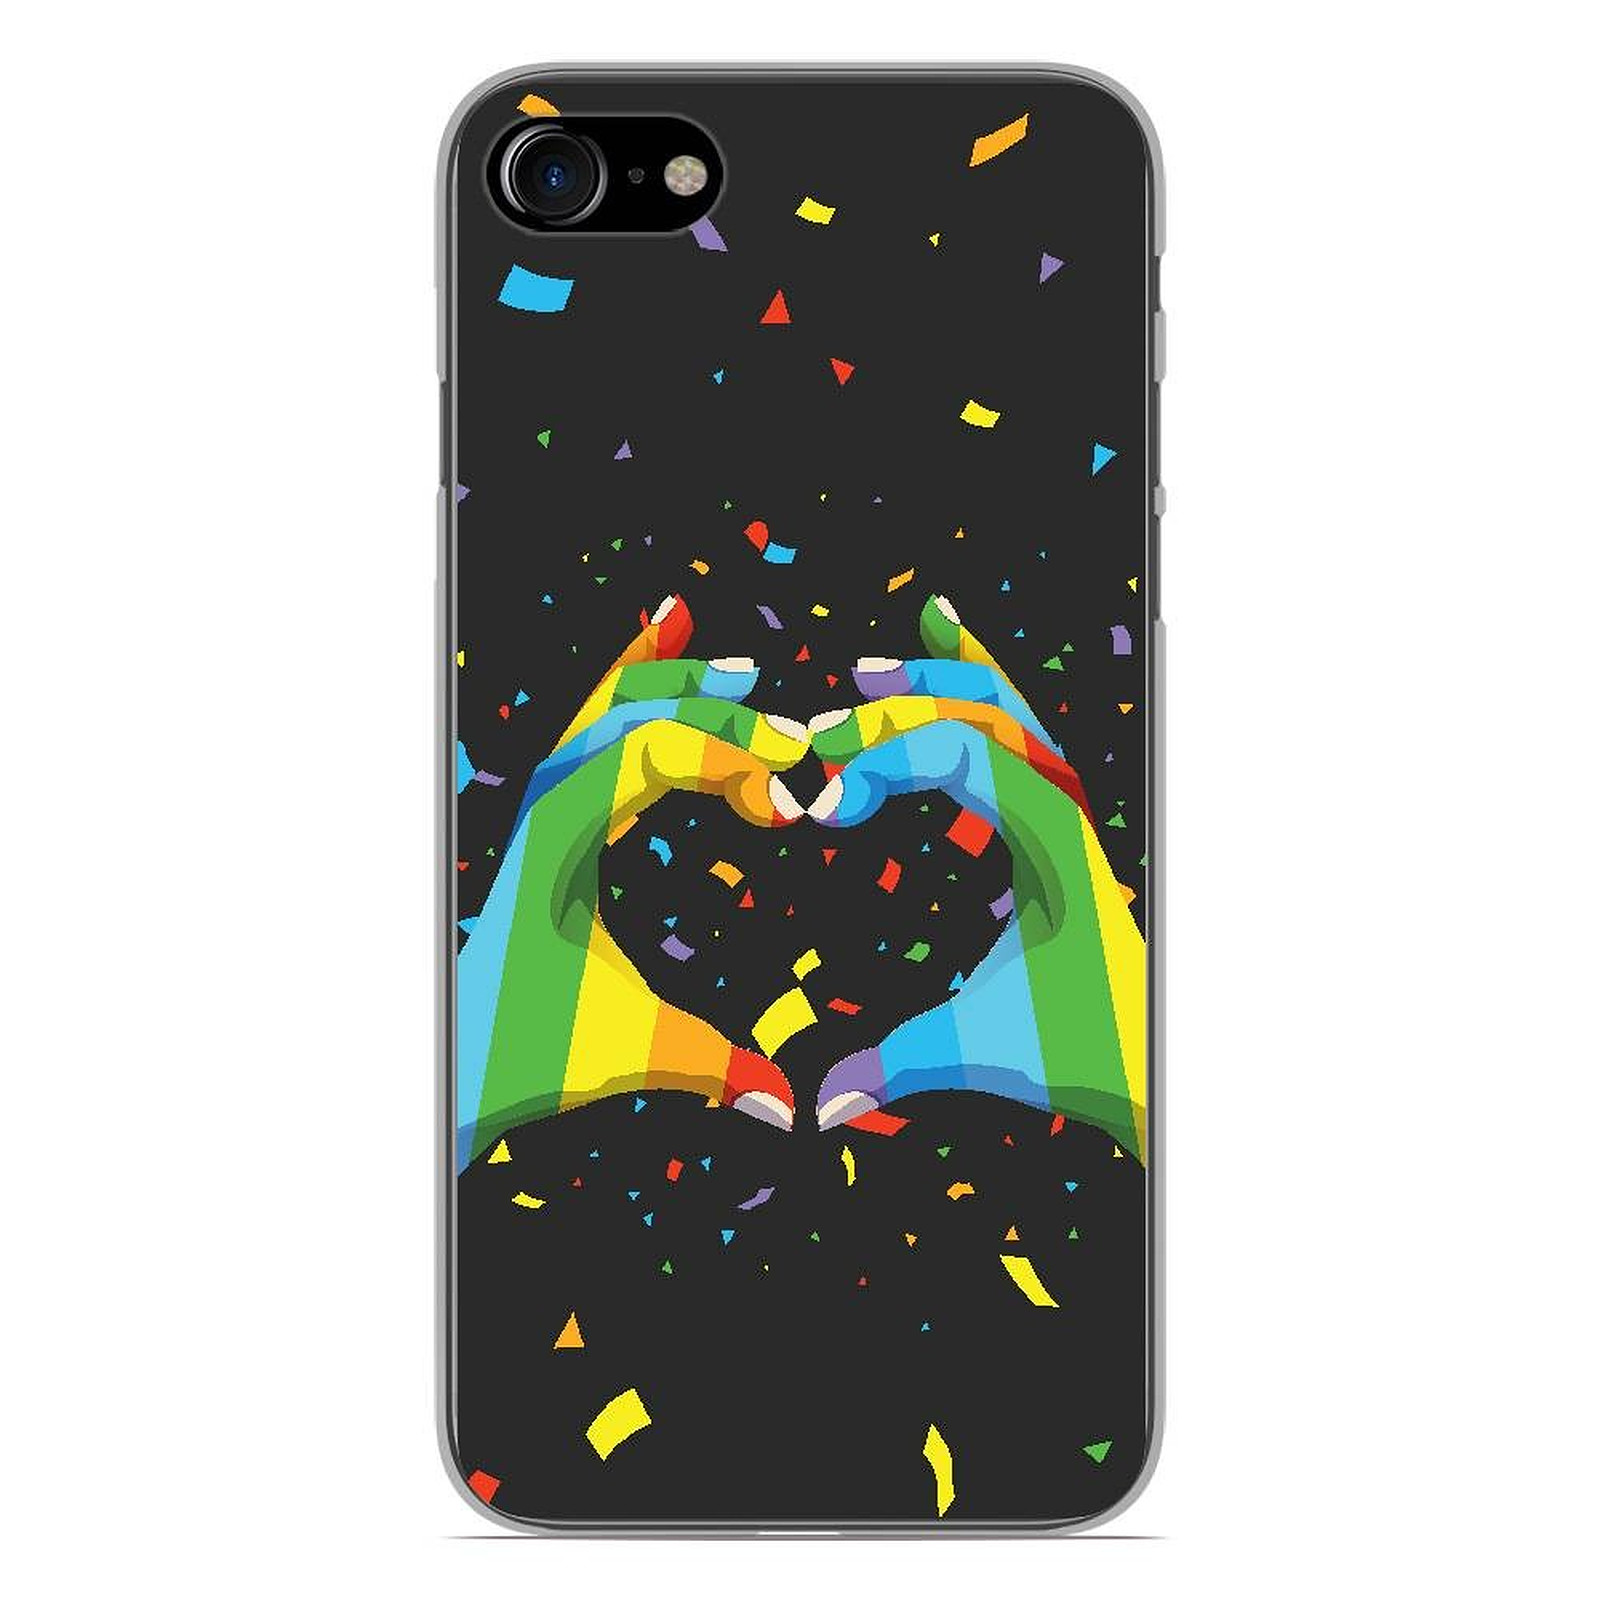 1001 Coques Coque silicone gel Apple iPhone 7 motif LGBT - Coque telephone 1001Coques